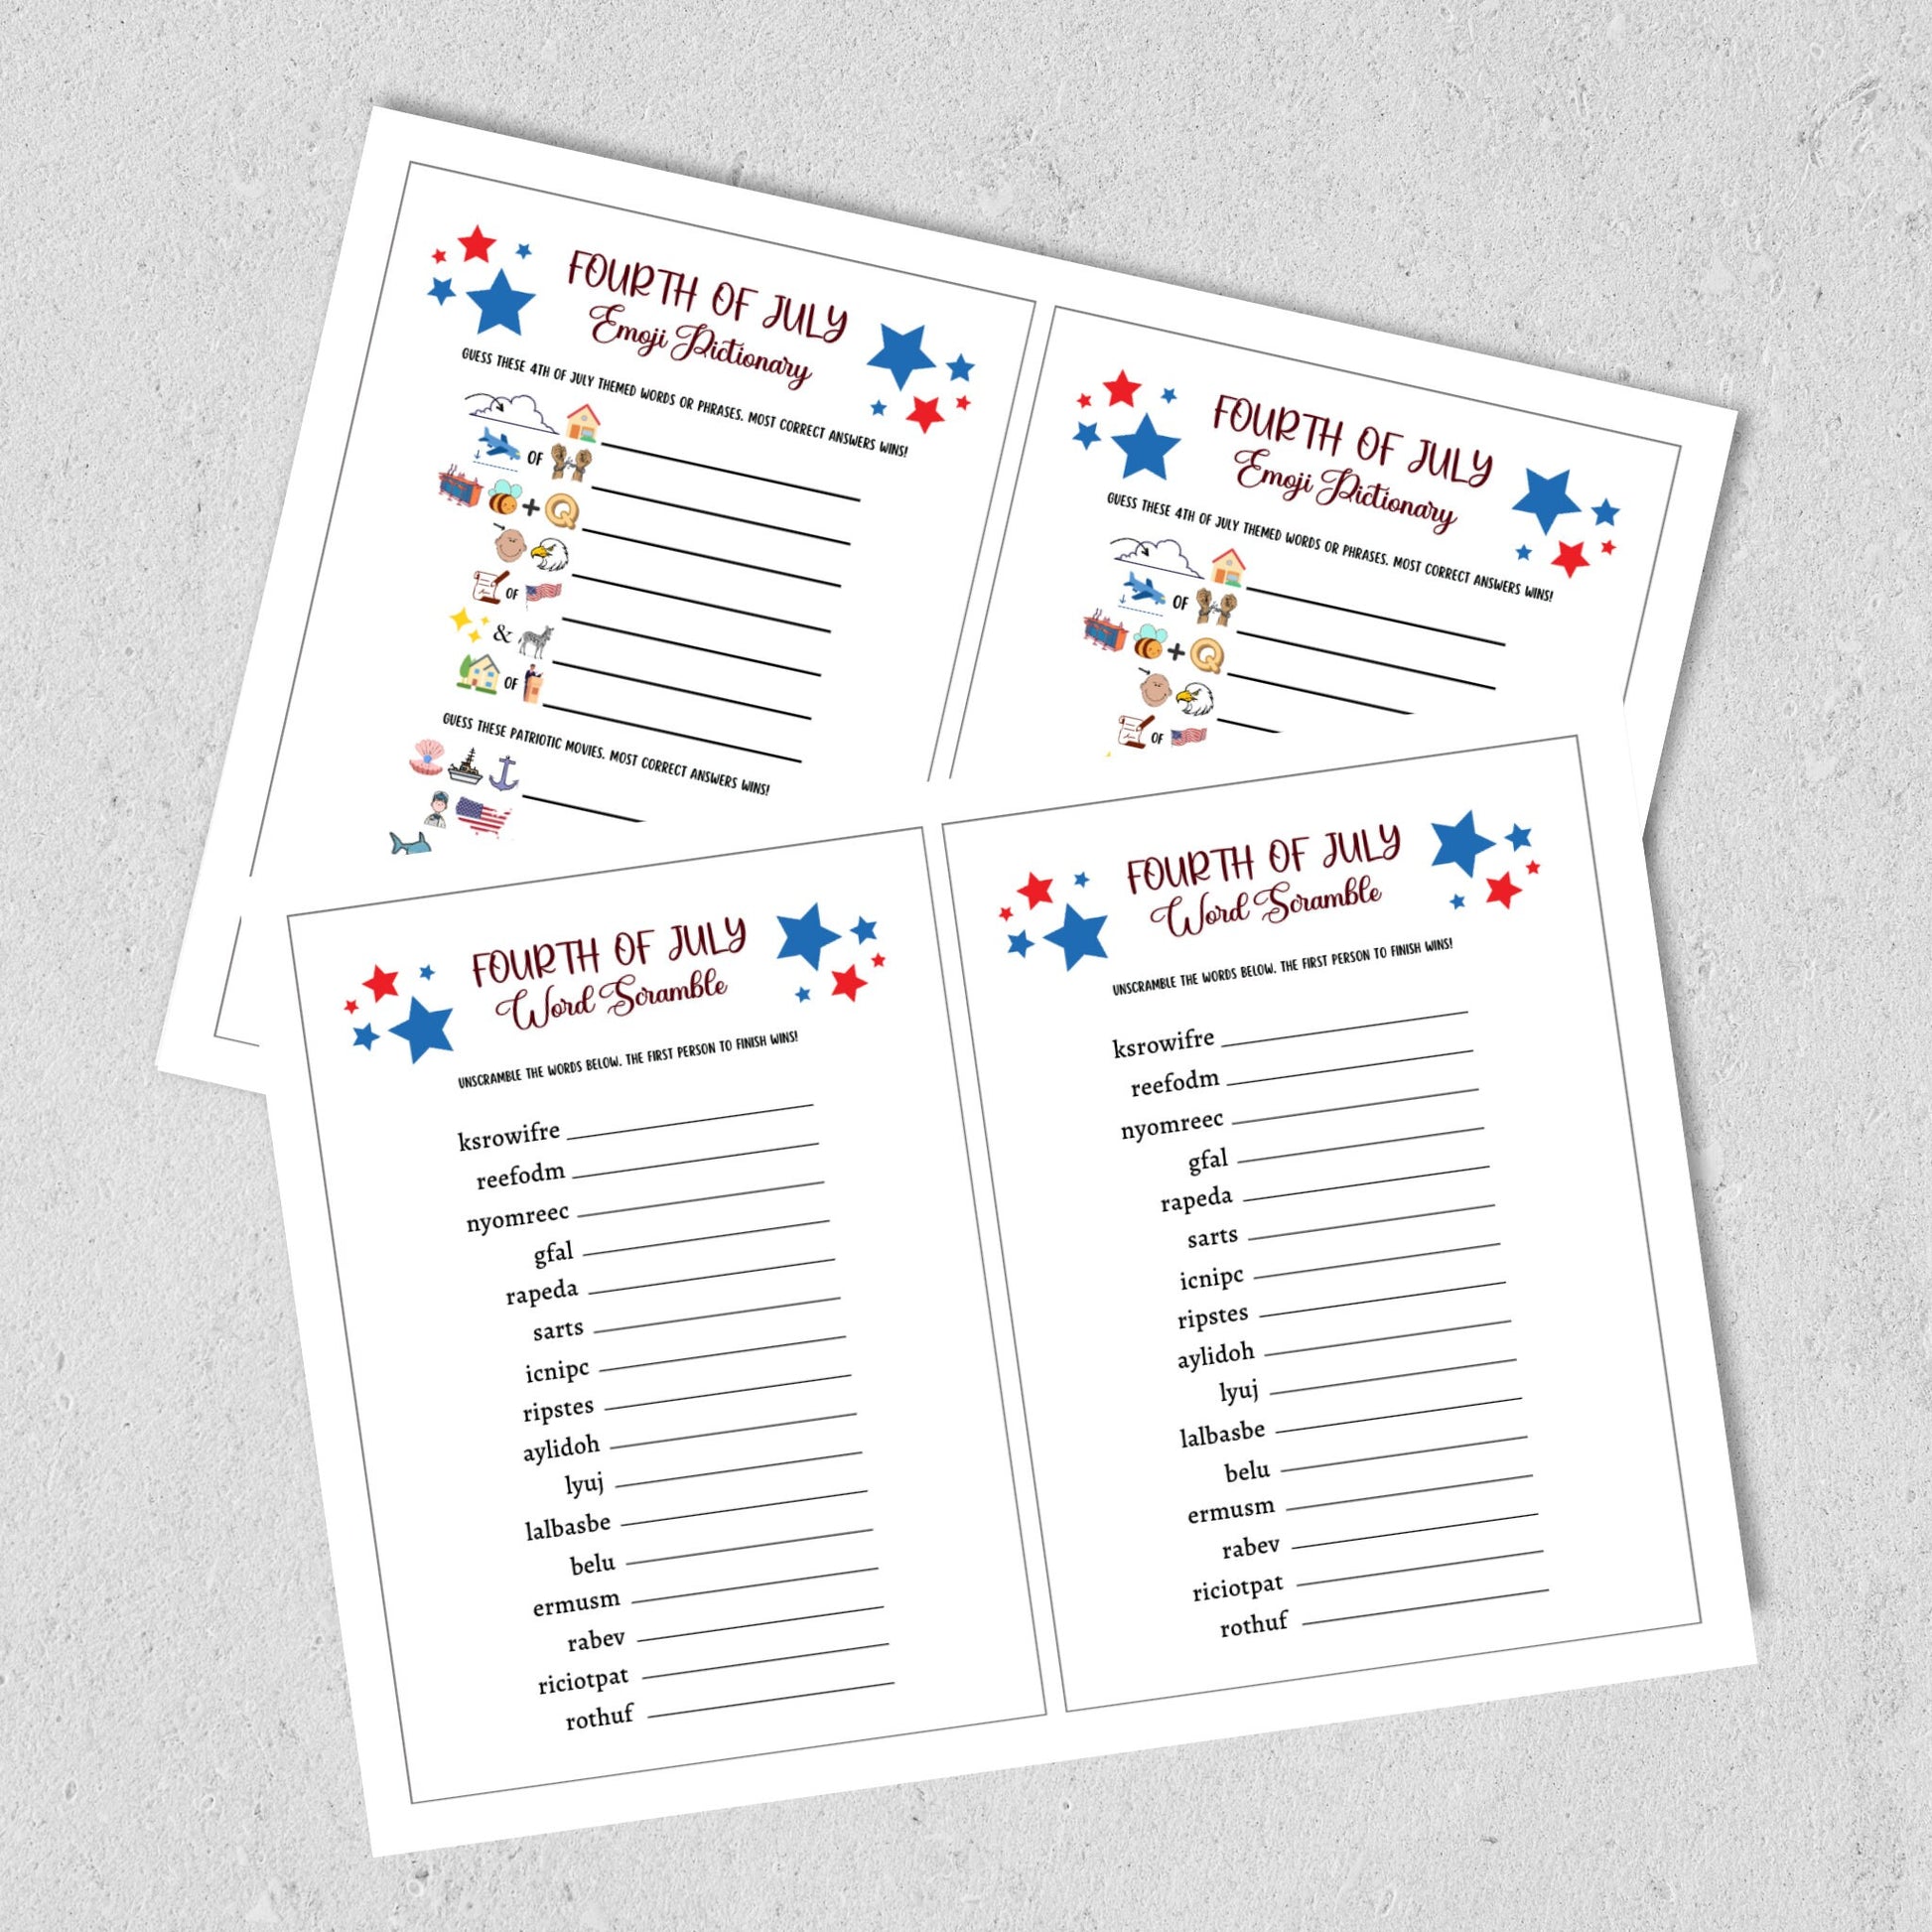 4th of July Games Printable, Independence Day Patriotic American Trivia Games, Party Games, Fourth of July Family Activity Kids and Adults